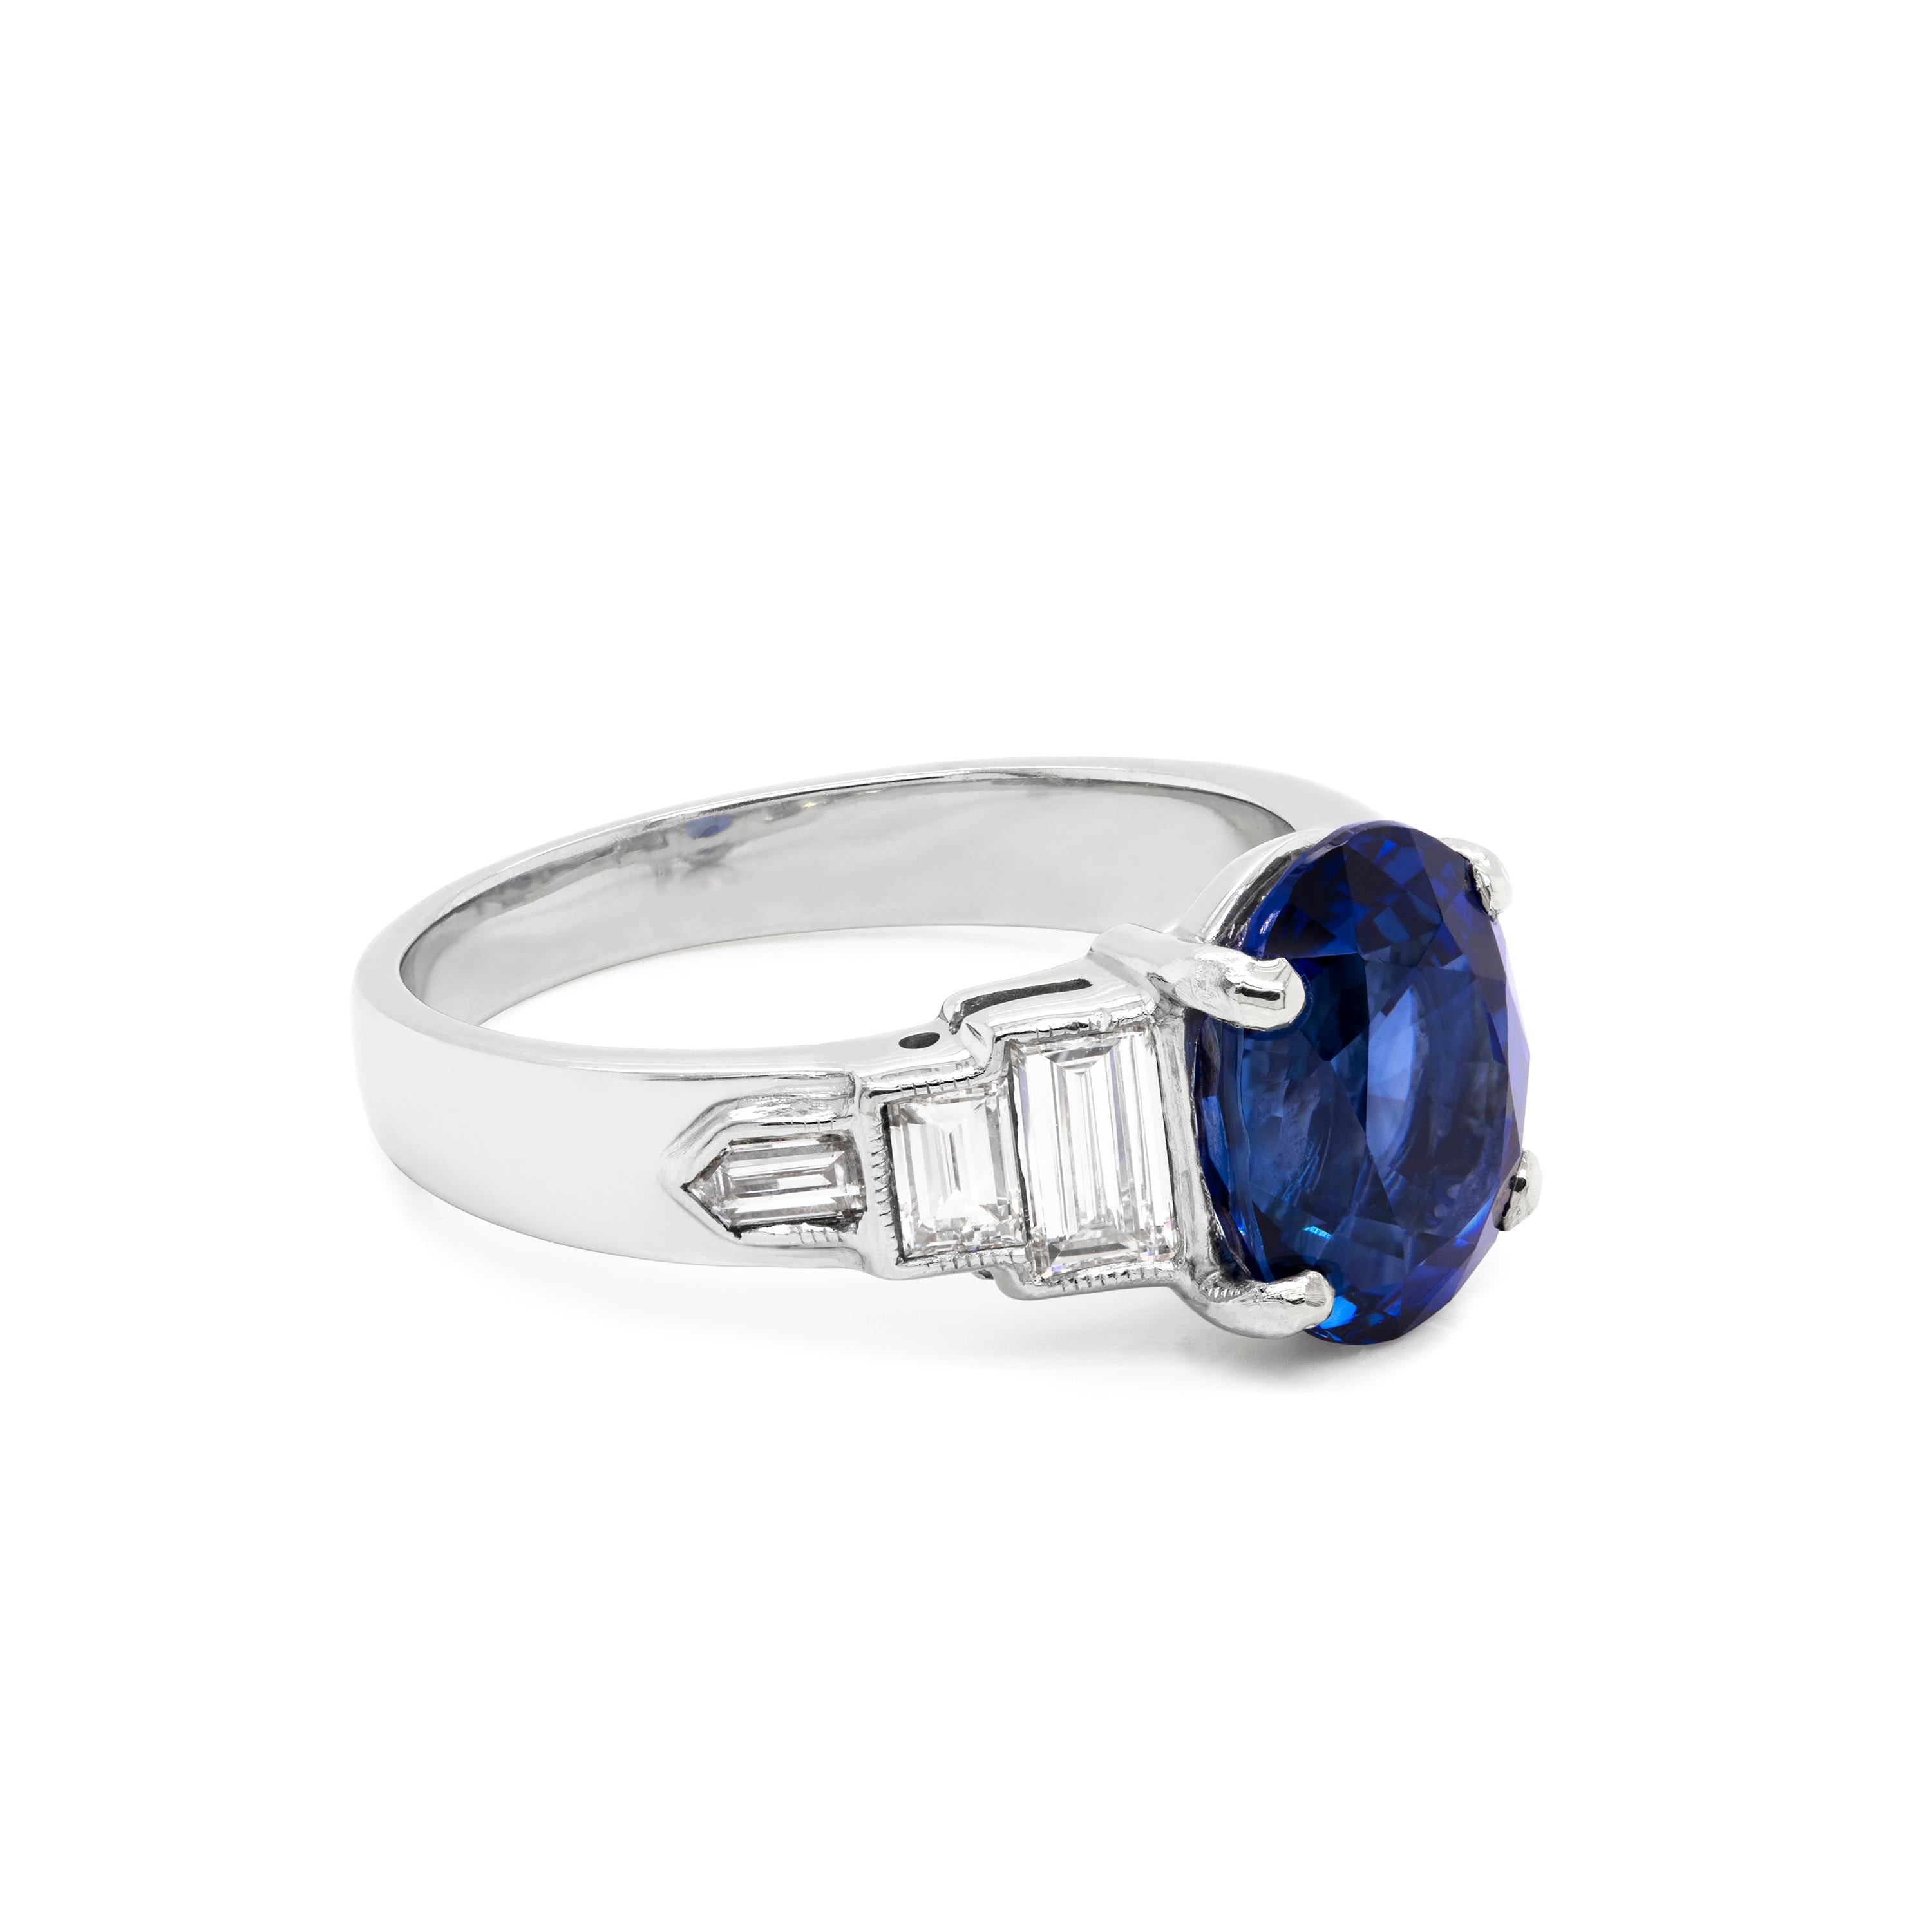 This beautiful Art Deco style, 1950's engagement ring features a natural royal blue oval sapphire weighing 3.18ct in a four claw open, back setting. The sapphire is accompanied by two step baguette cut diamonds and a bullet cut diamond on each